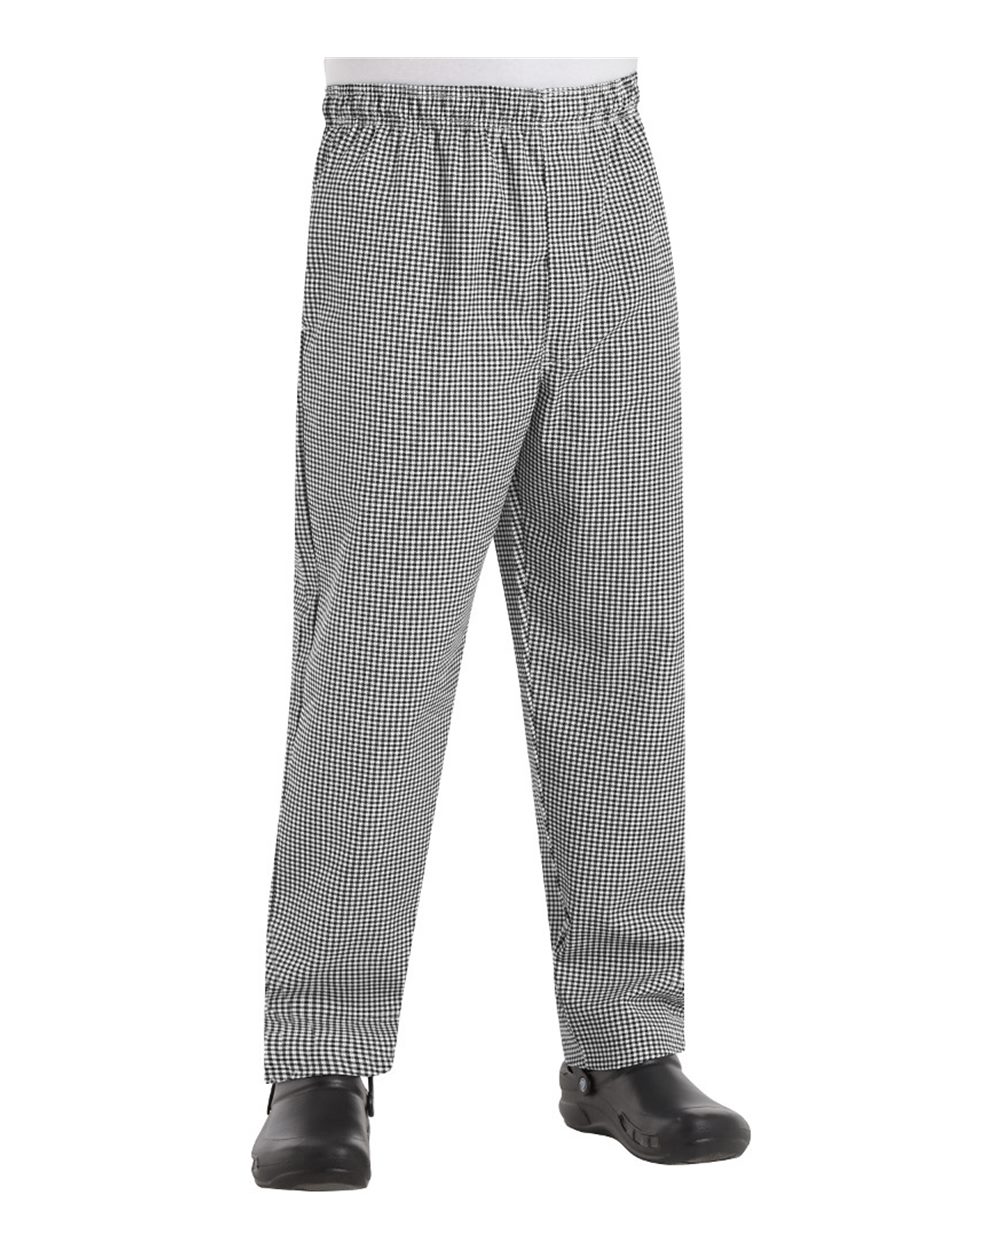 Baggy Chef Pants with Zipper Fly-